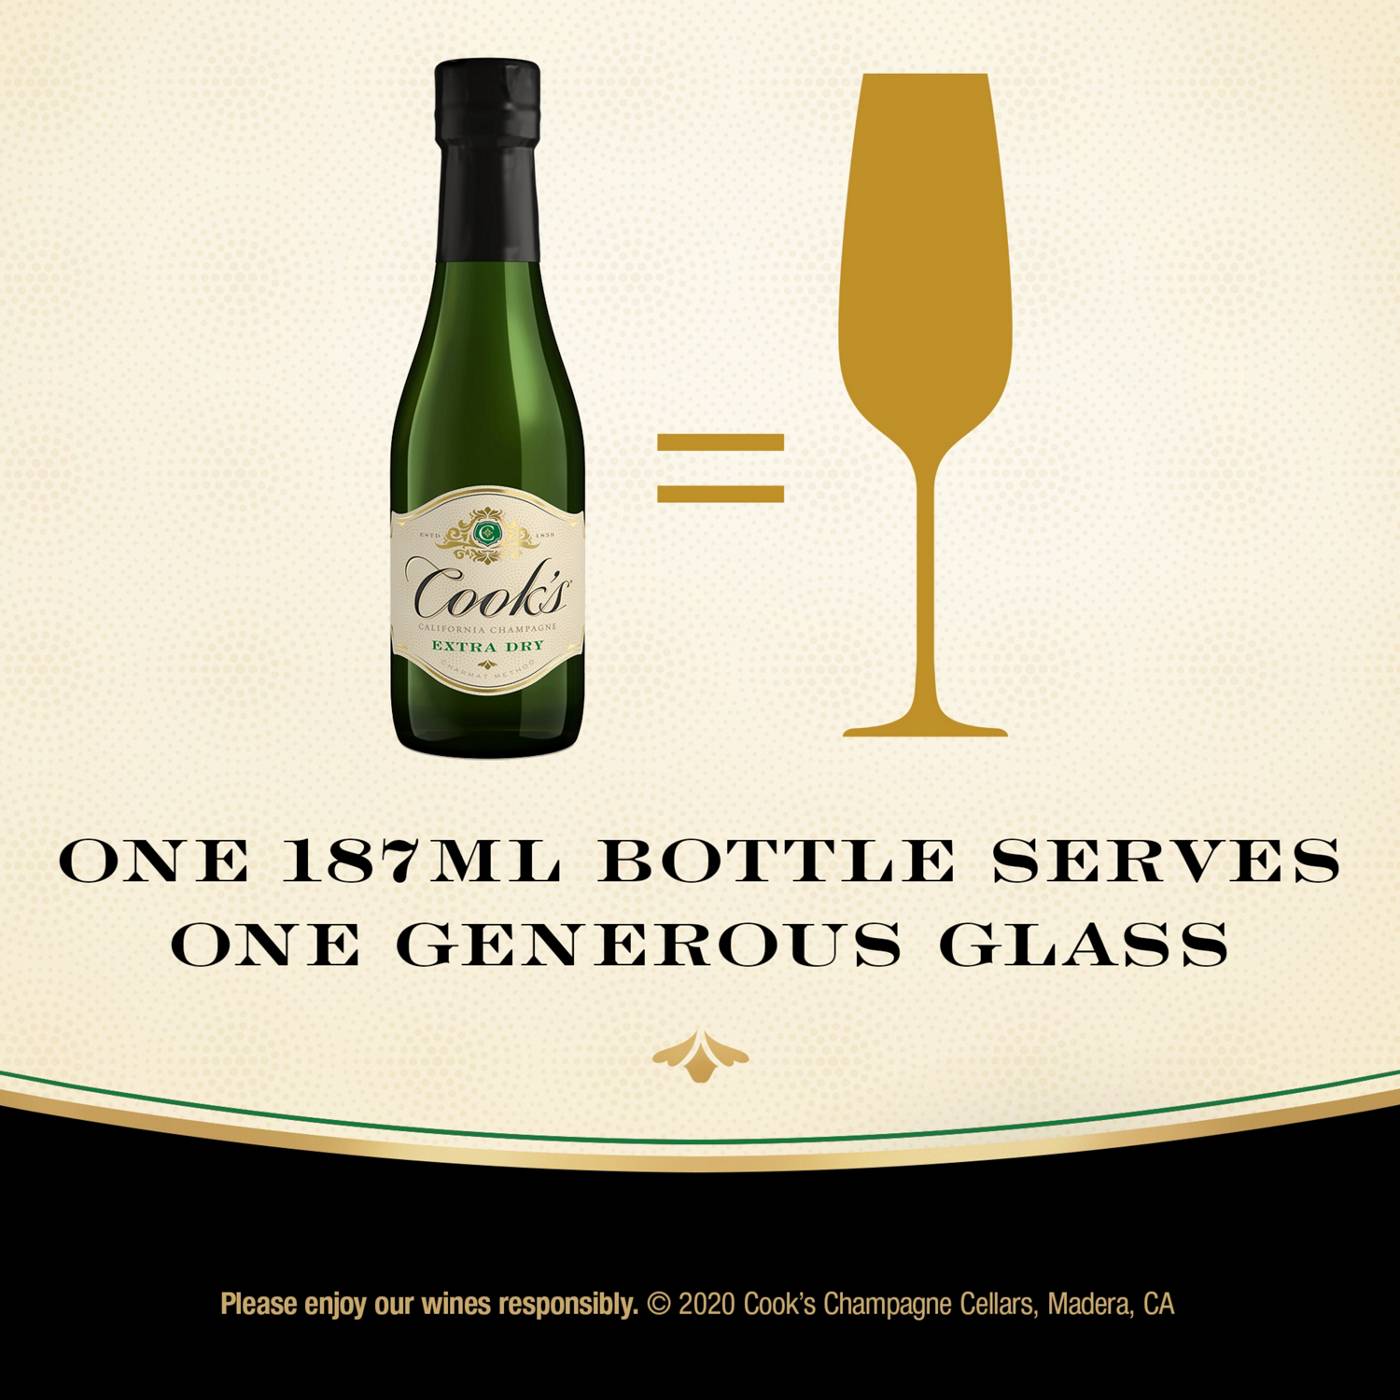 Cook's California Champagne Extra Dry White Sparkling Wine 187 mL Bottles; image 4 of 7